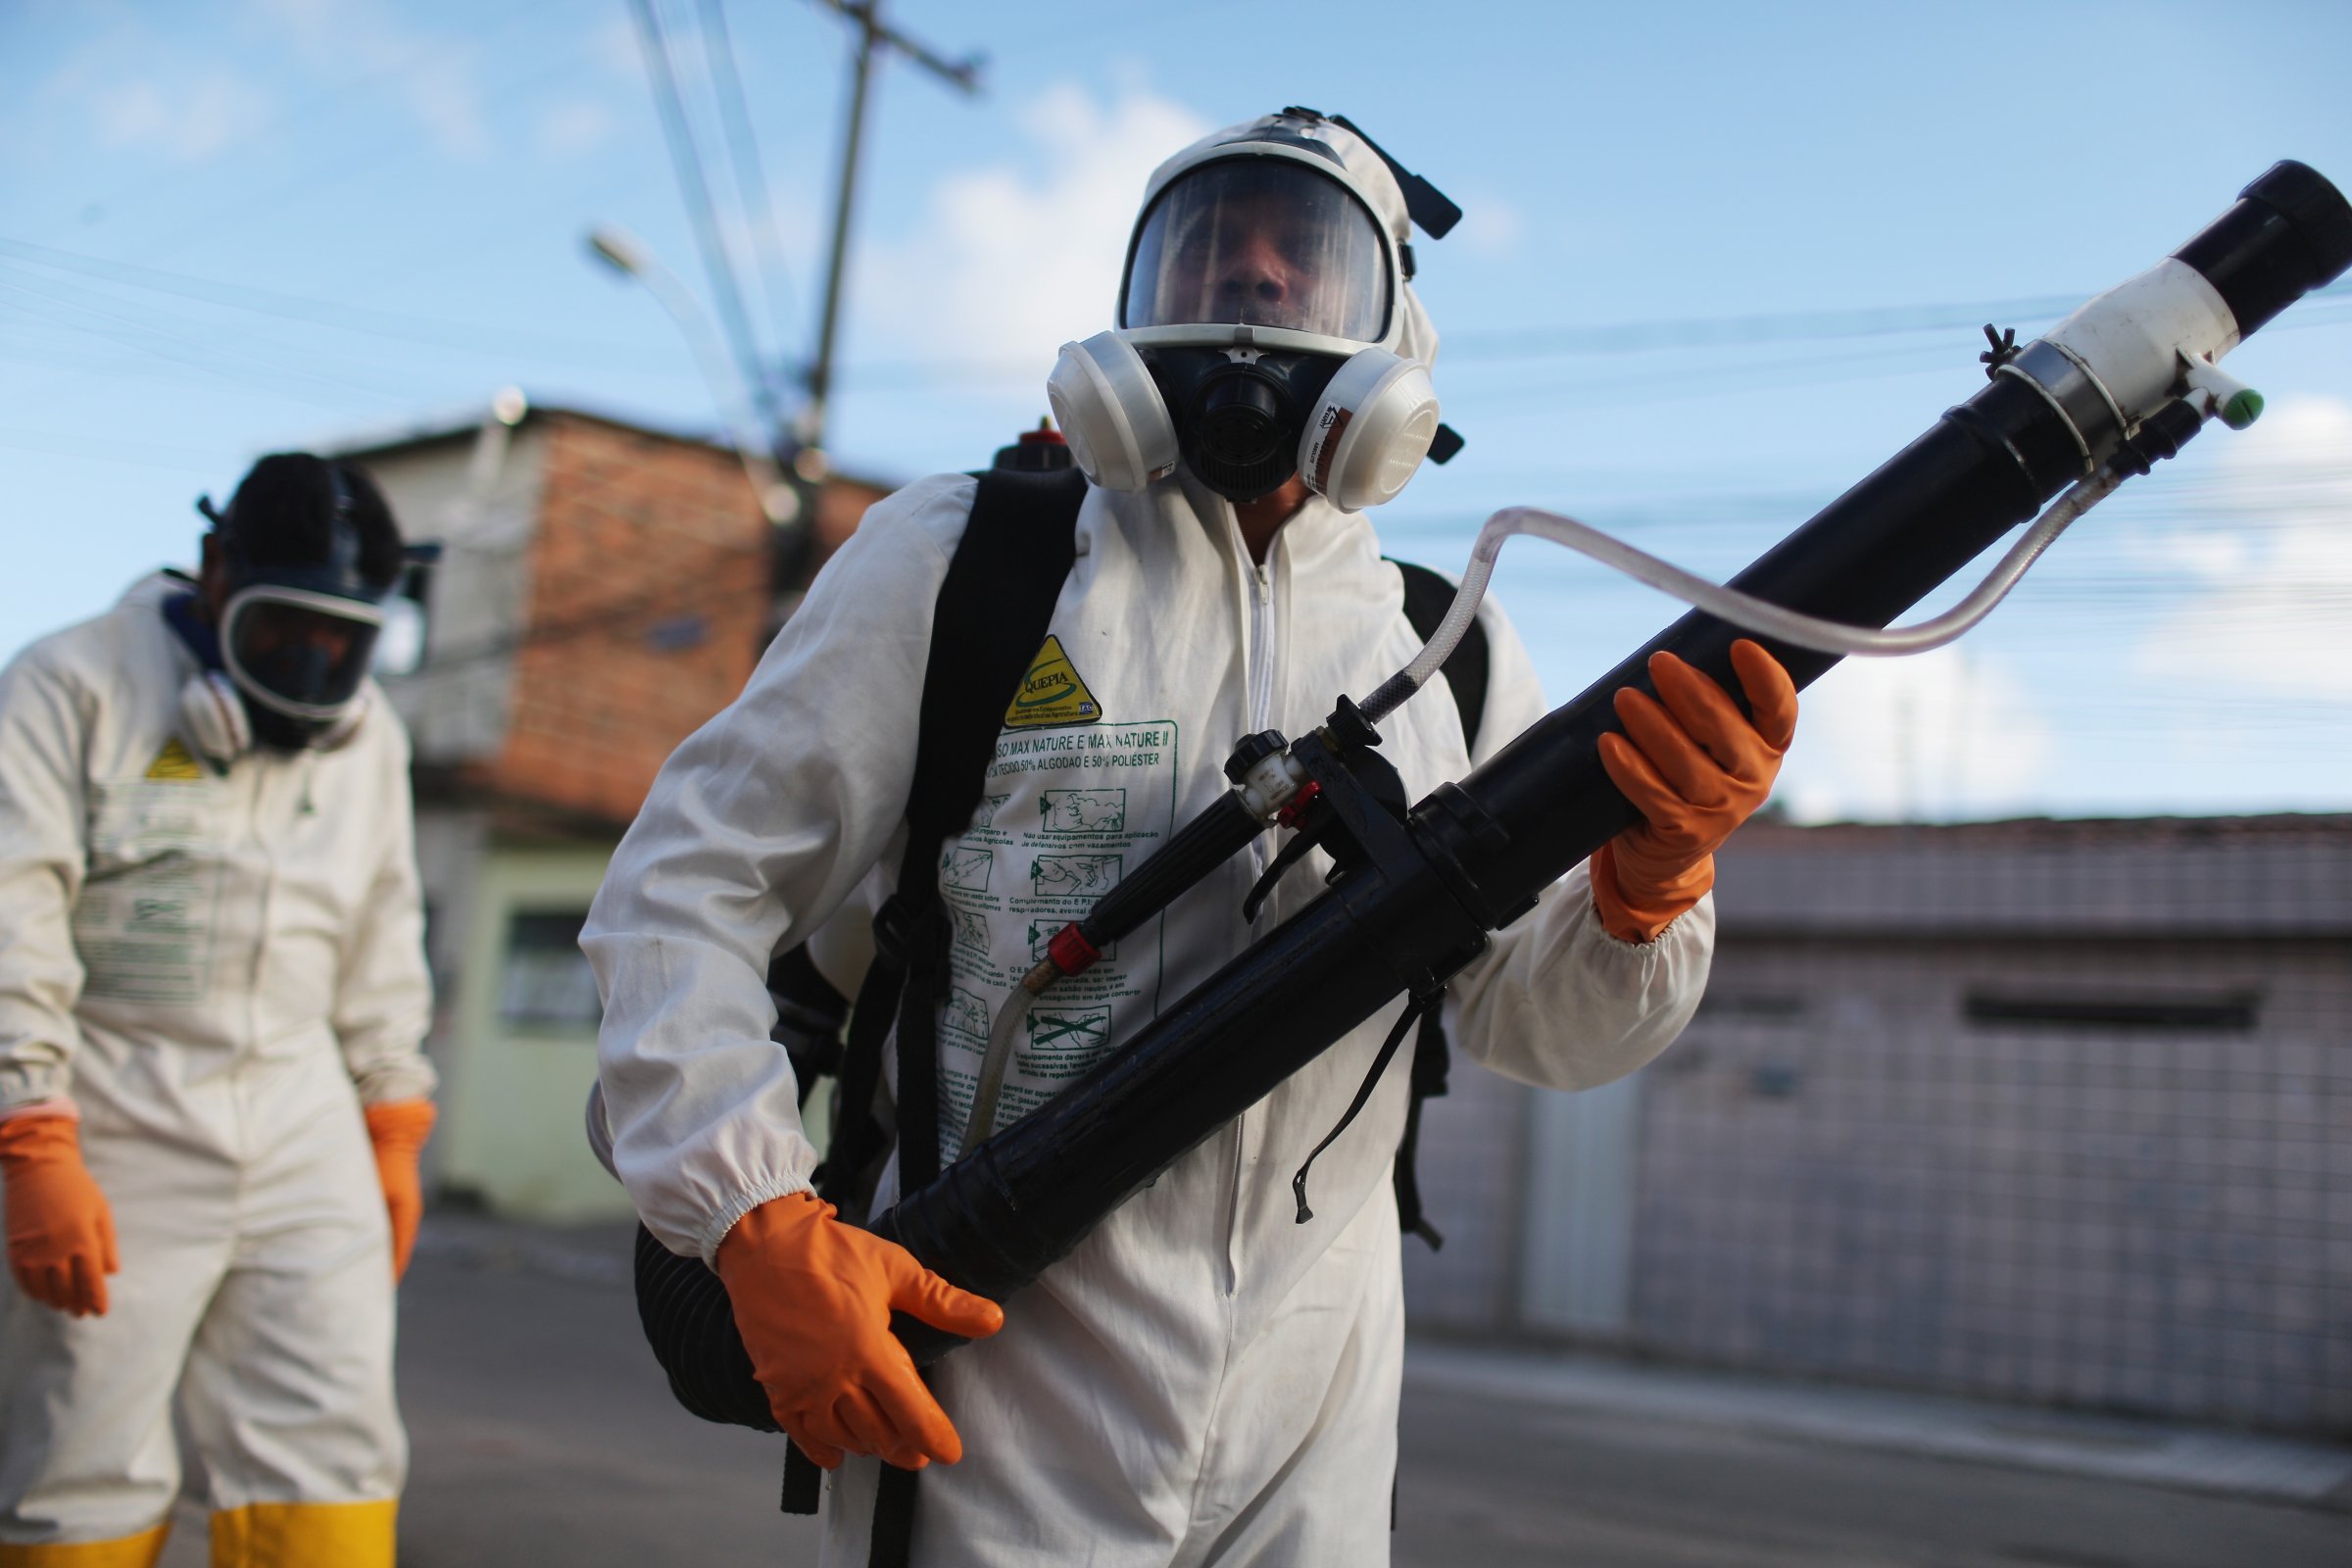 Health workers fumigate in an attempt to eradicate the mosquito which transmits the Zika virus in Recife, Pernambuco state, Brazil on Jan. 28, 2016.